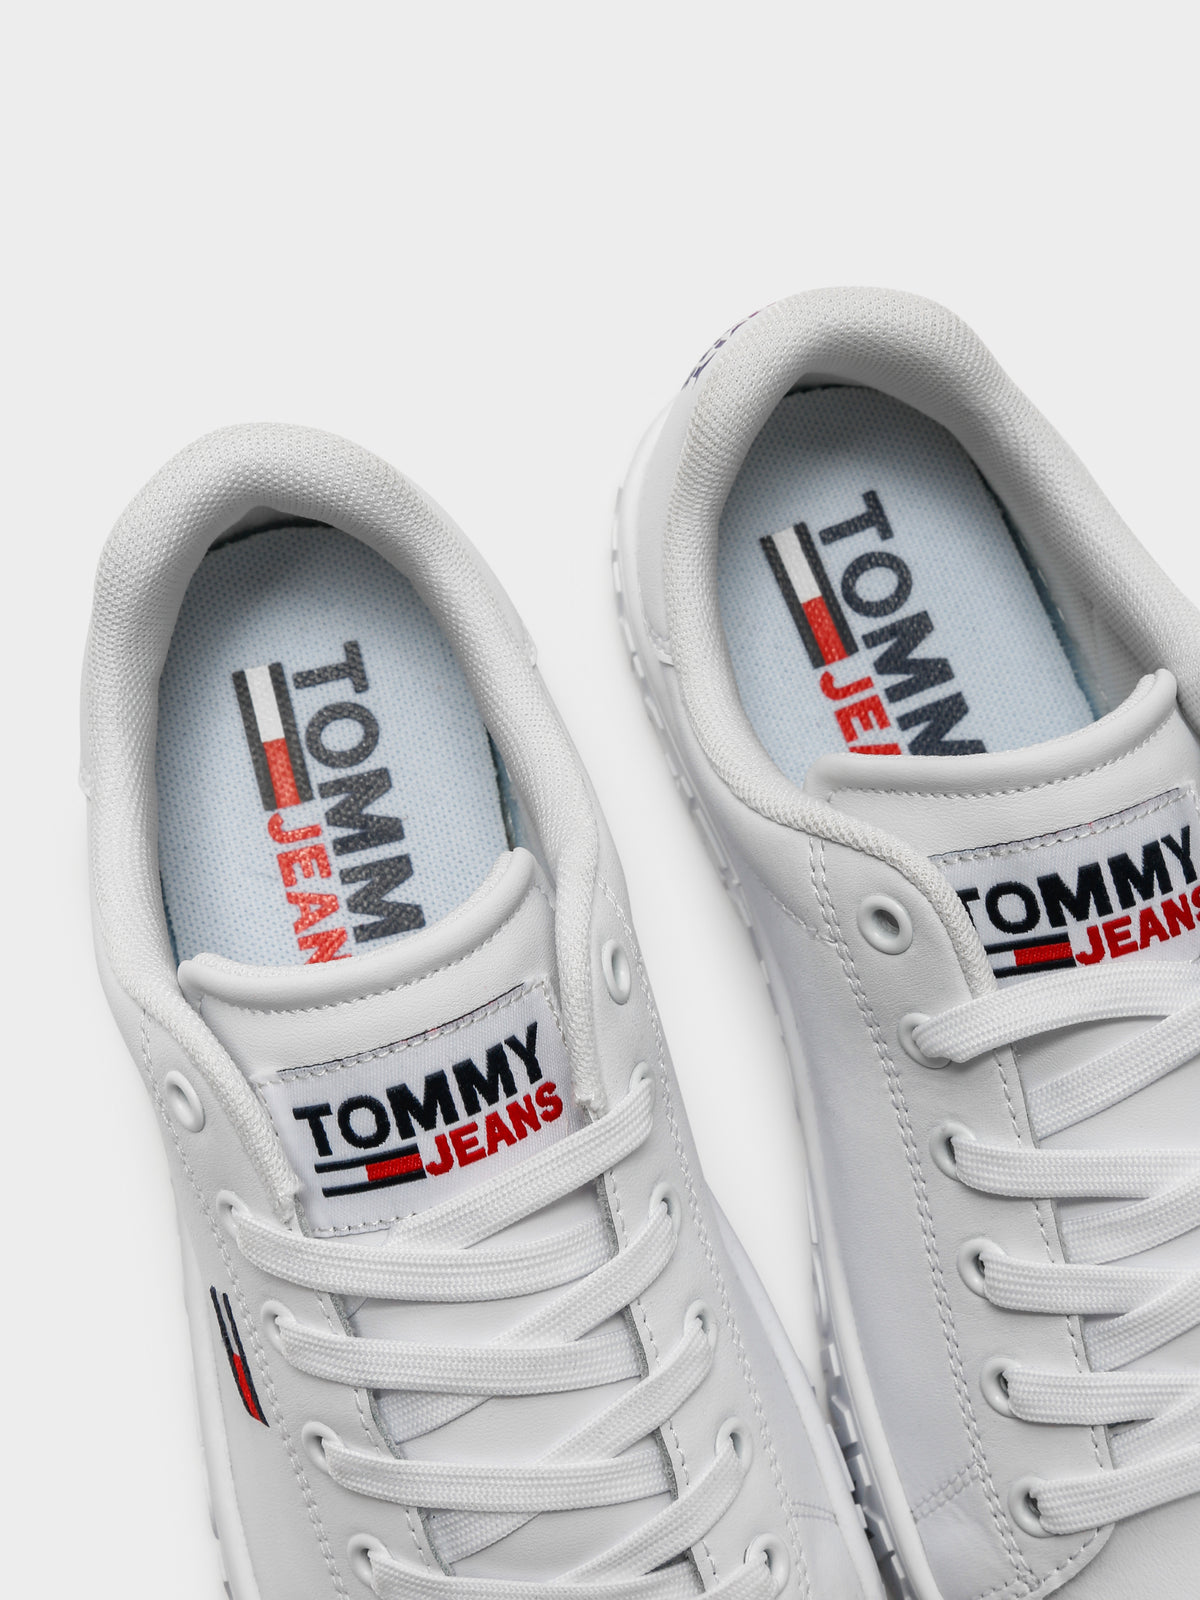 Cool Tommy Jeans Sneakers in White